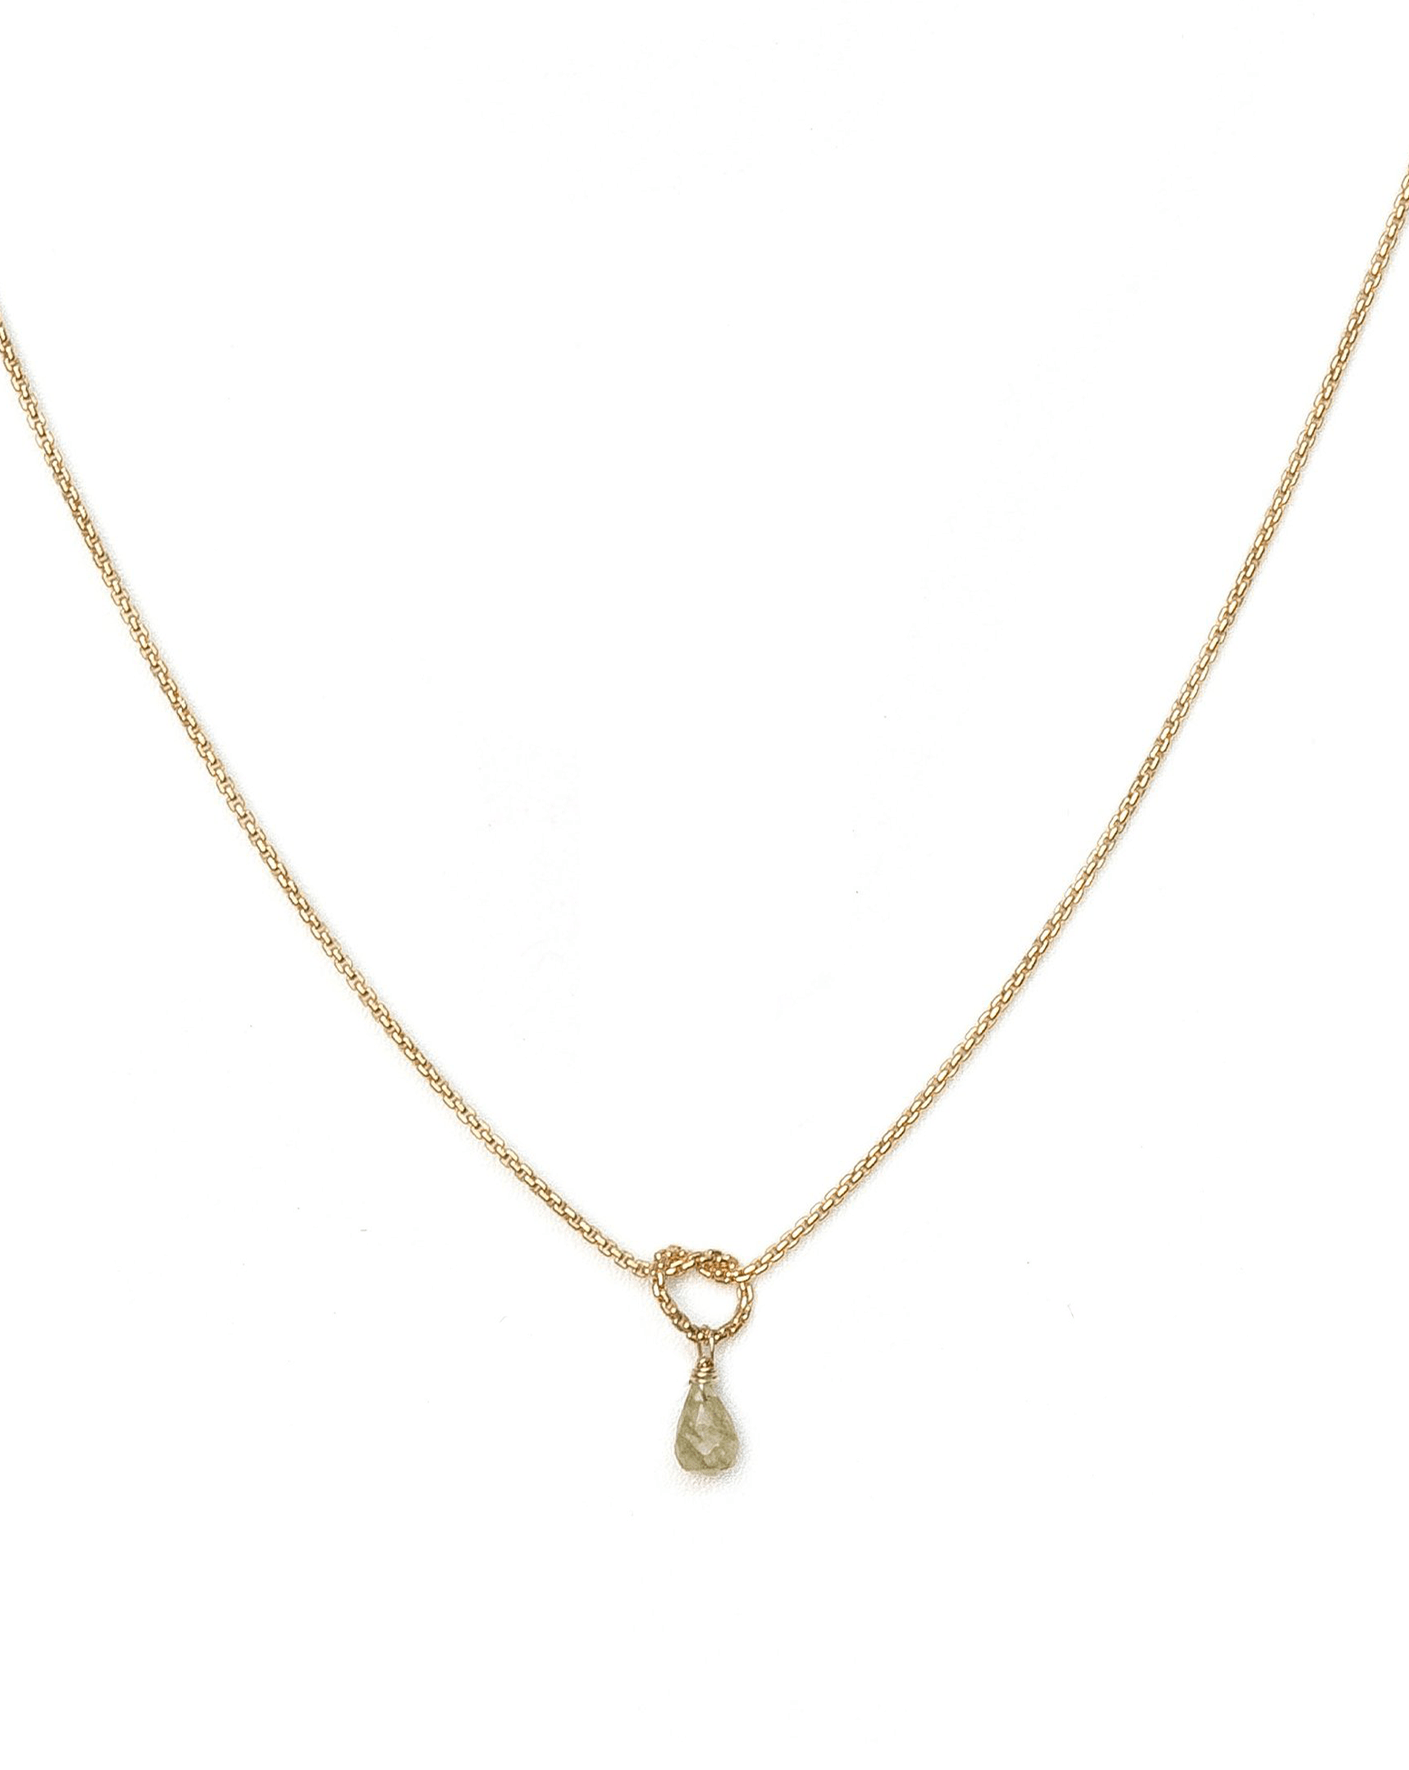 Love Knot Necklace by KOZAKH. A 16 to 18 inch adjustable length necklace, crafted in 14K Gold Filled, featuring a knot and a faceted Champagne Sapphire droplet.